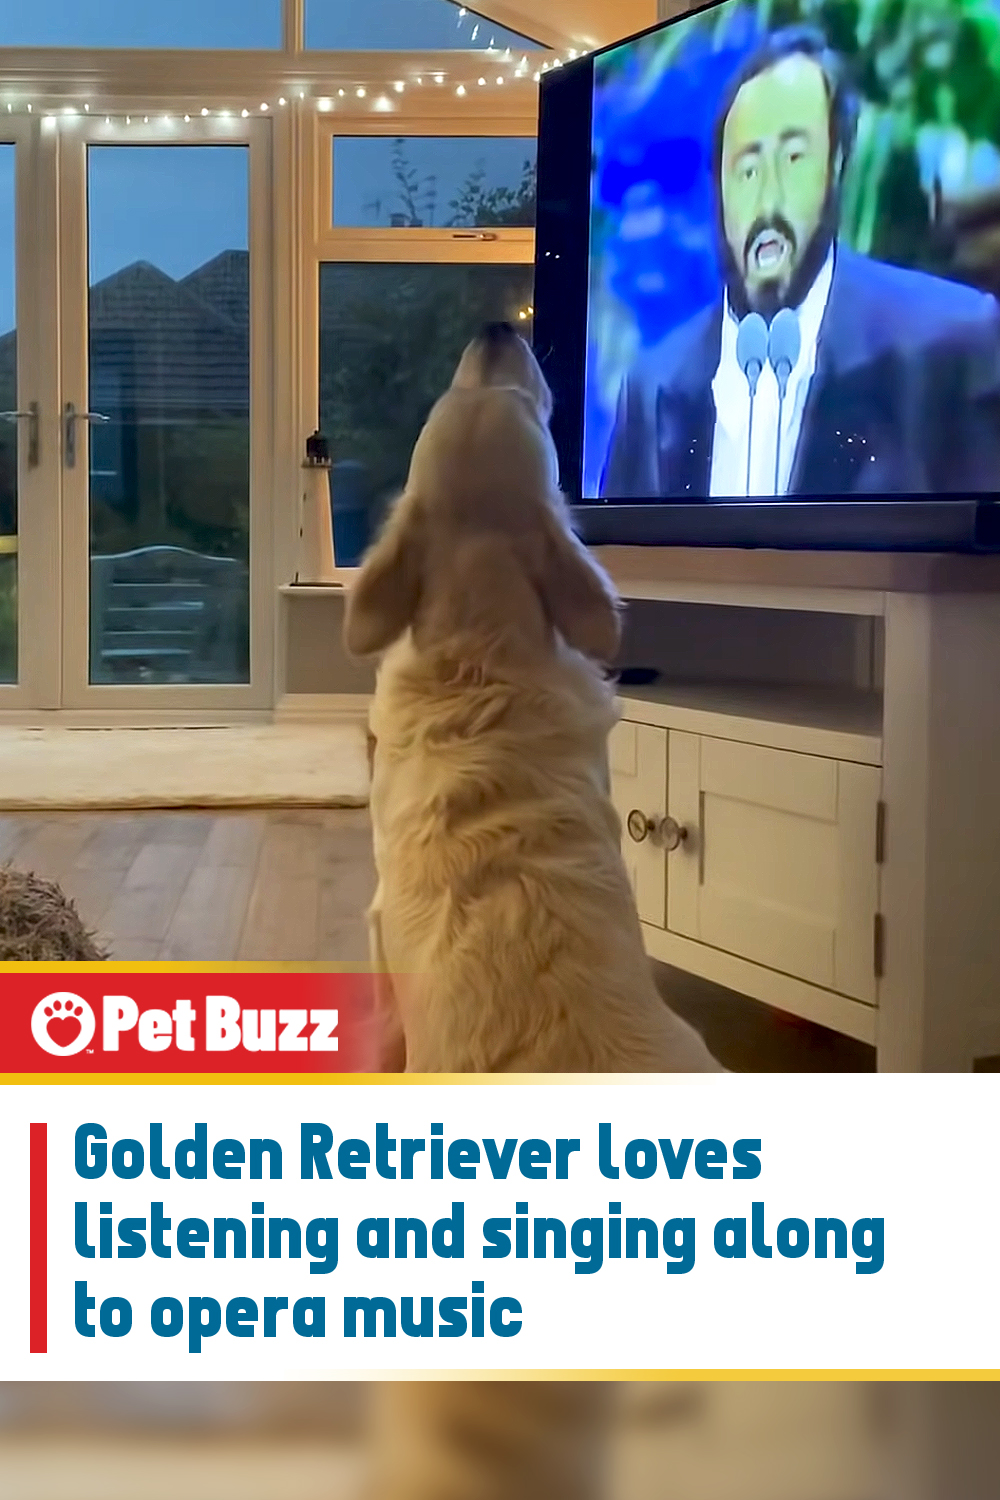 Golden Retriever loves listening and singing along to opera music